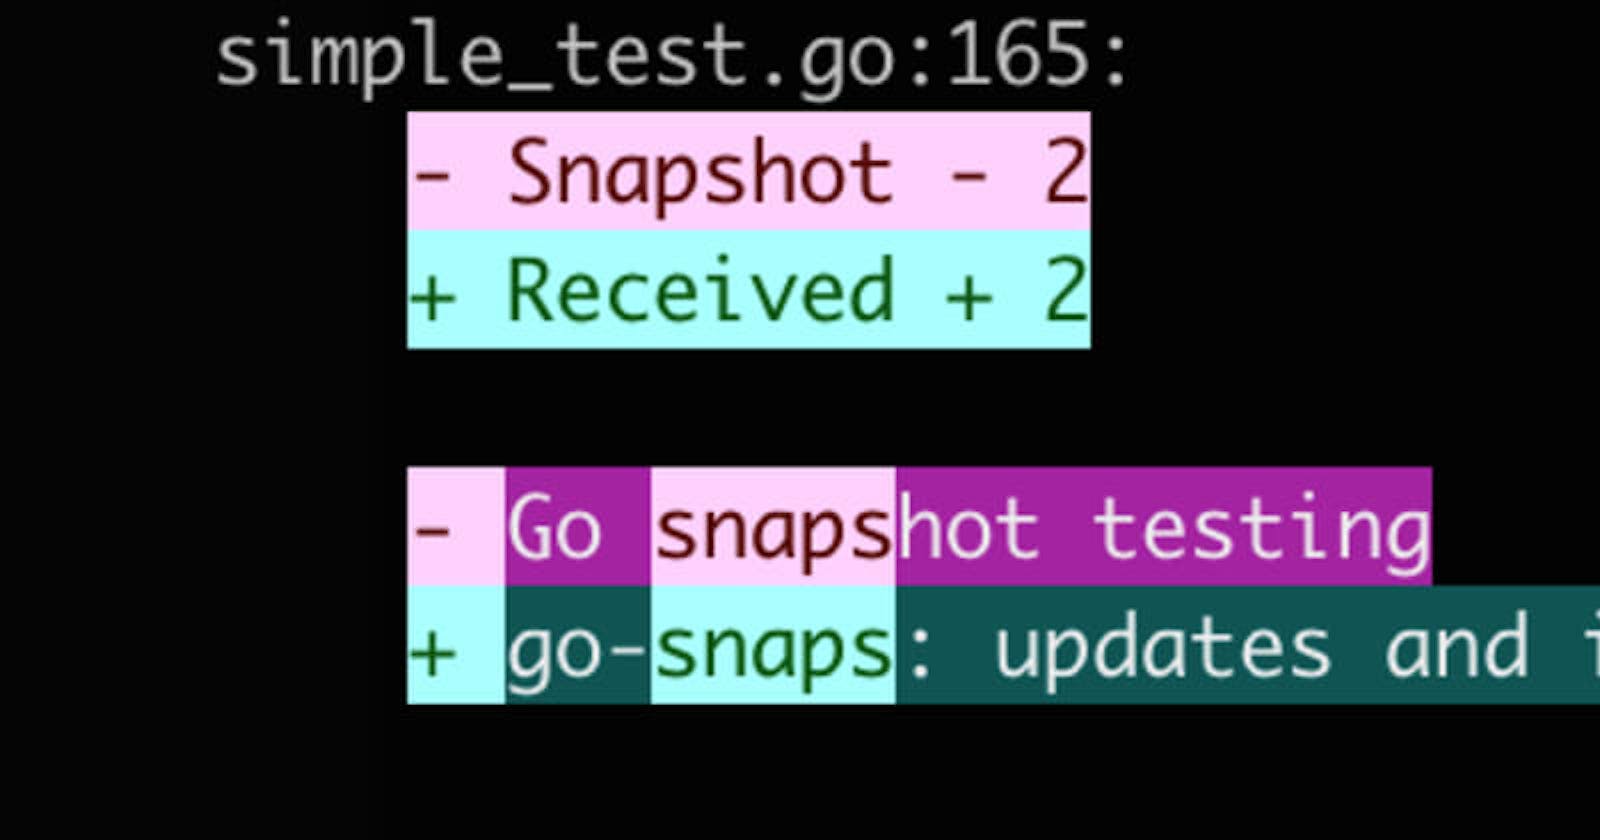 Go Snaps: The Latest Updates and Improvements